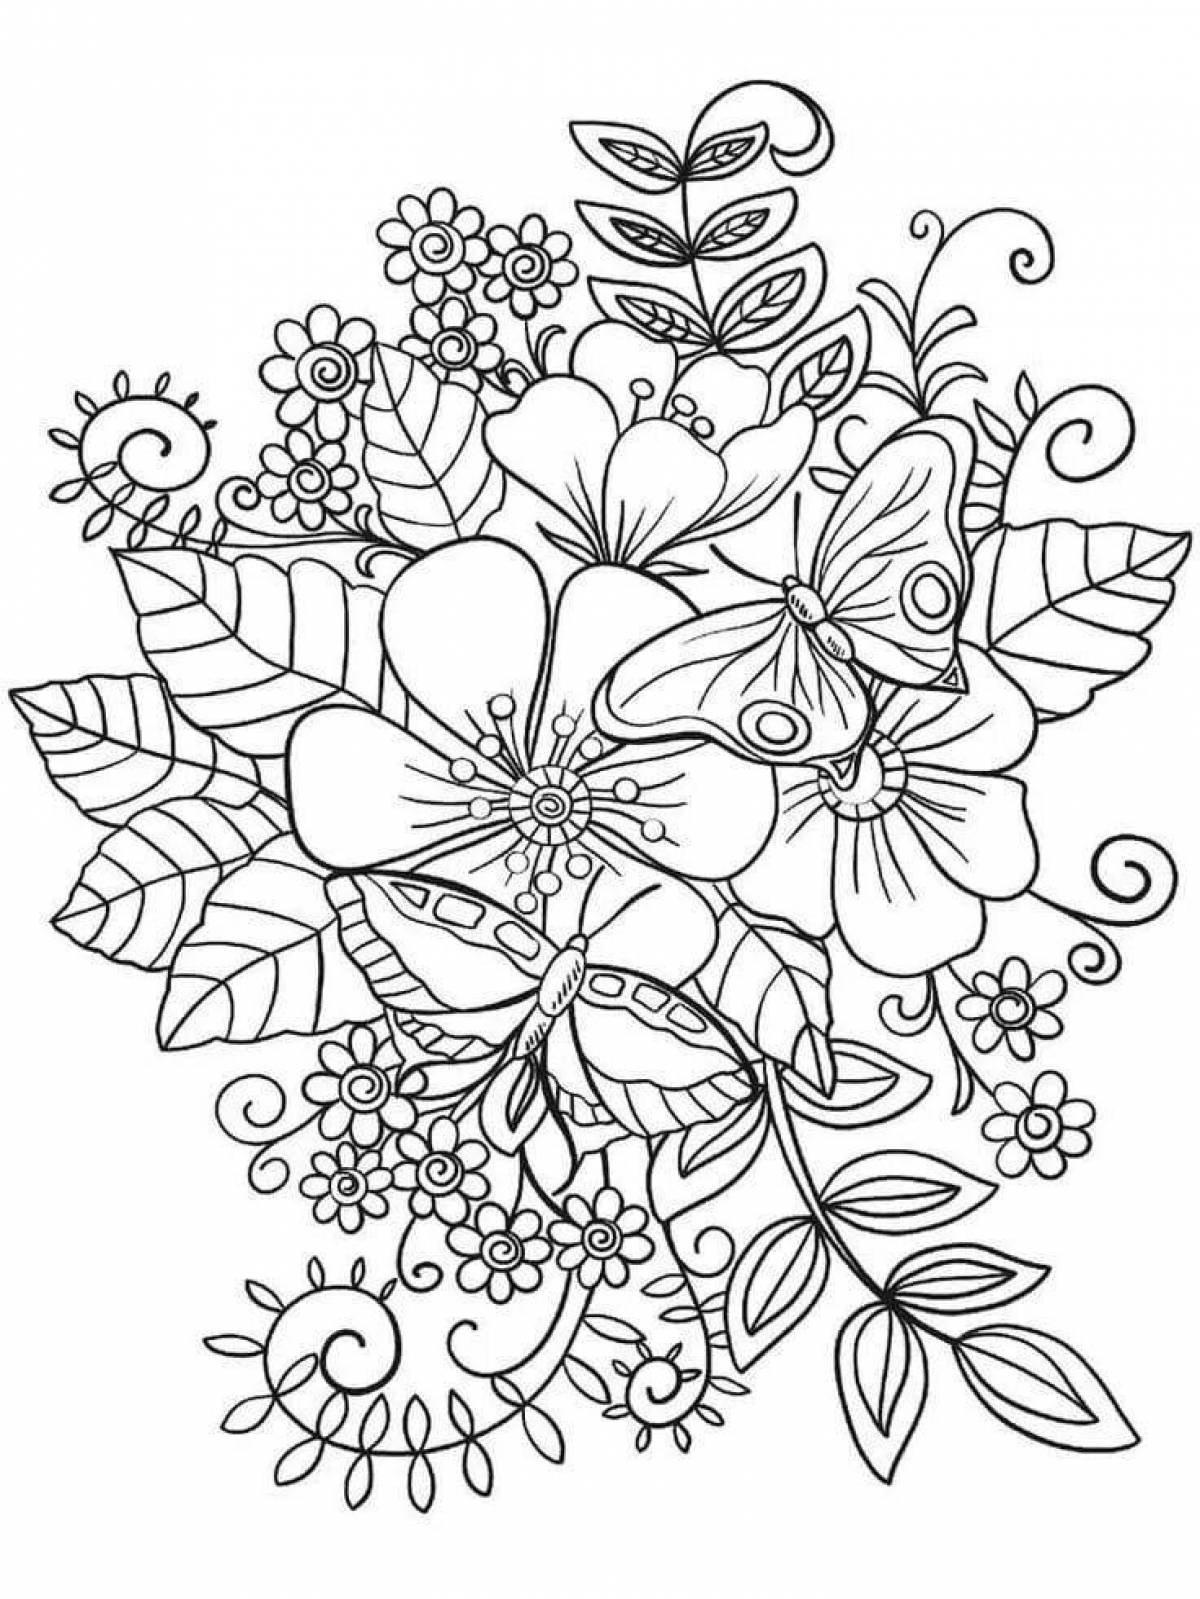 Amazing flower coloring pages for girls